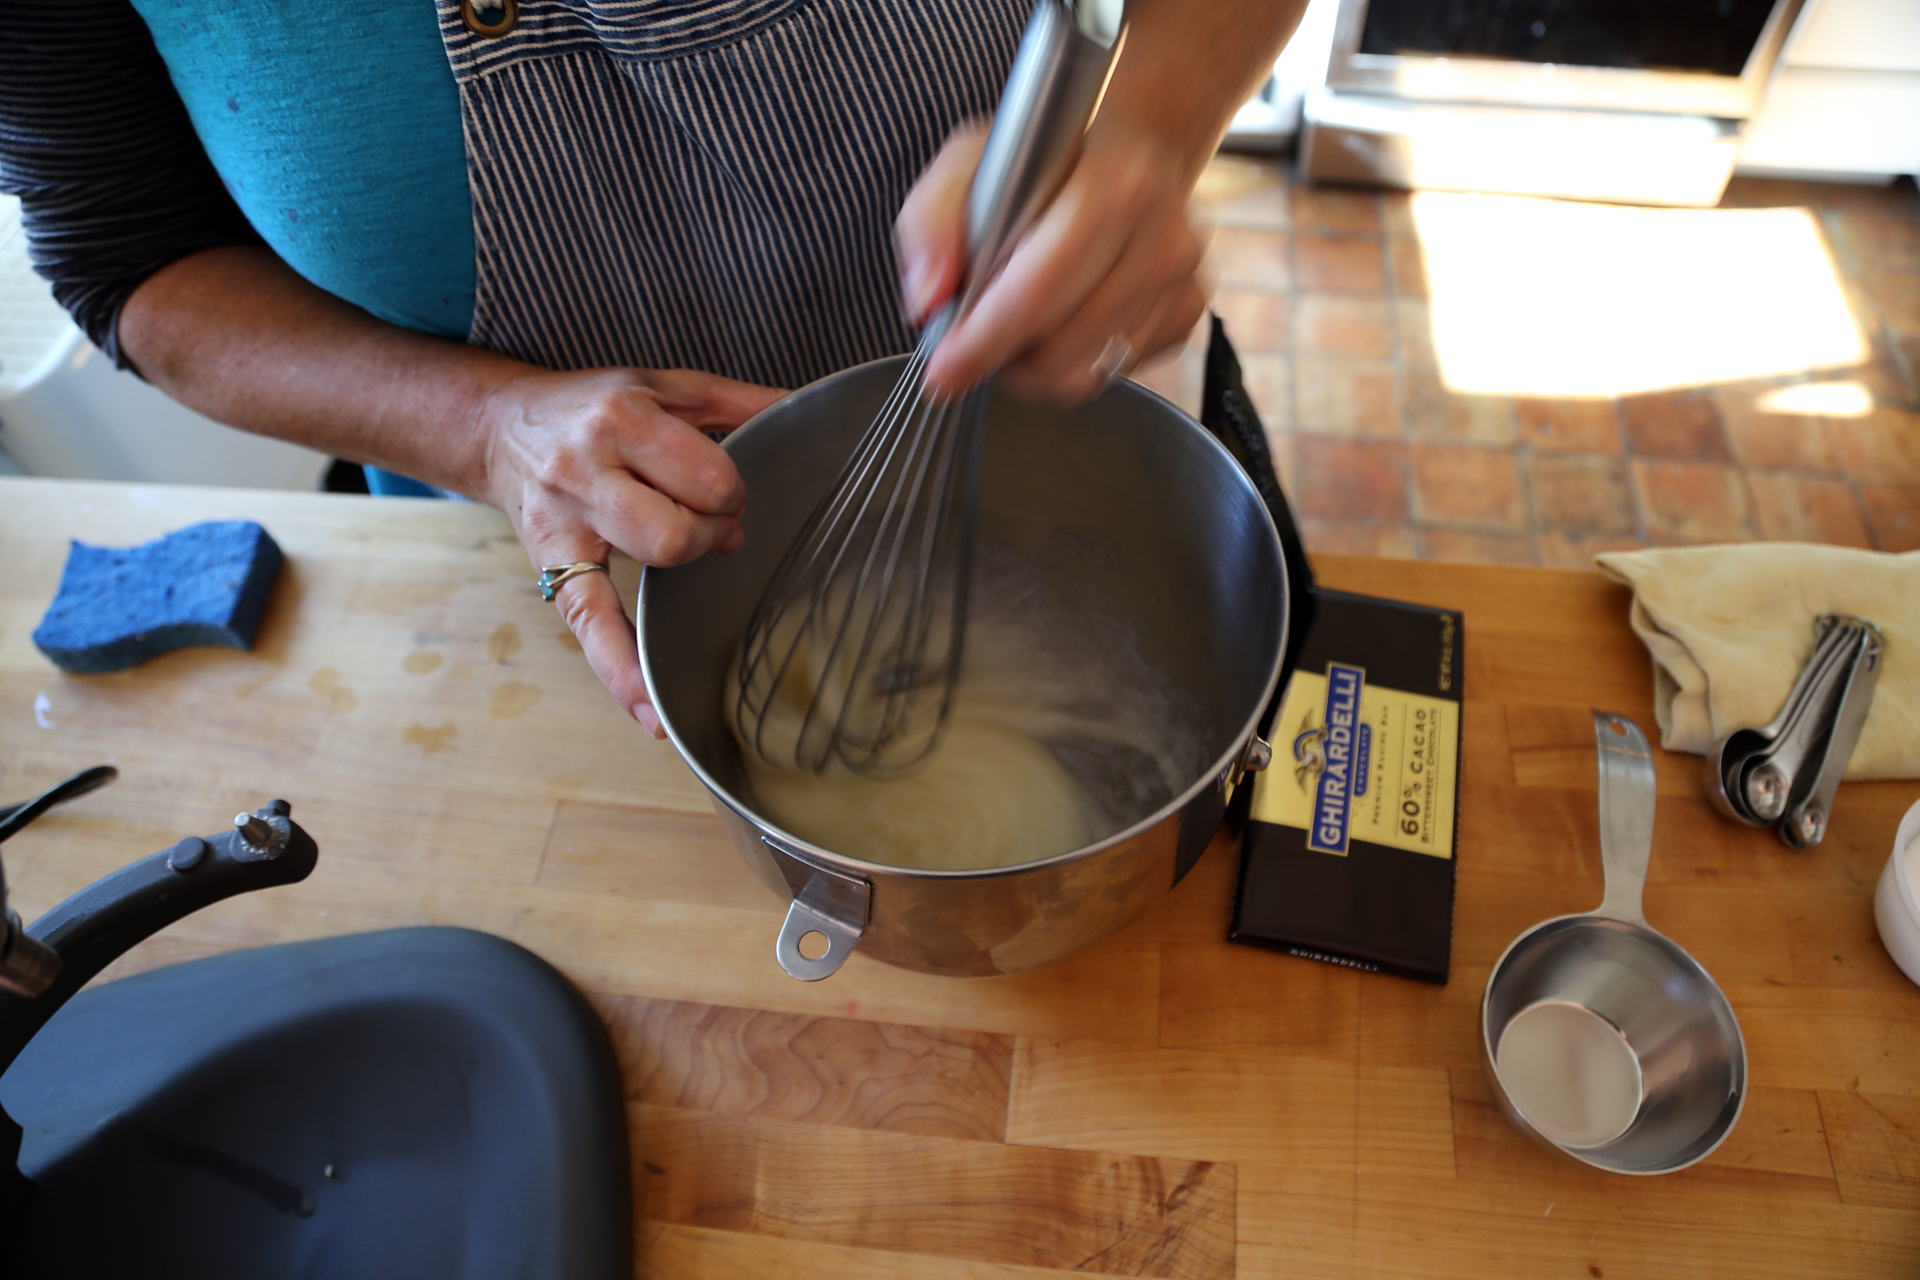 In the bowl of a stand mixer, whisk together the egg whites, sugar, cream of tartar, and salt.